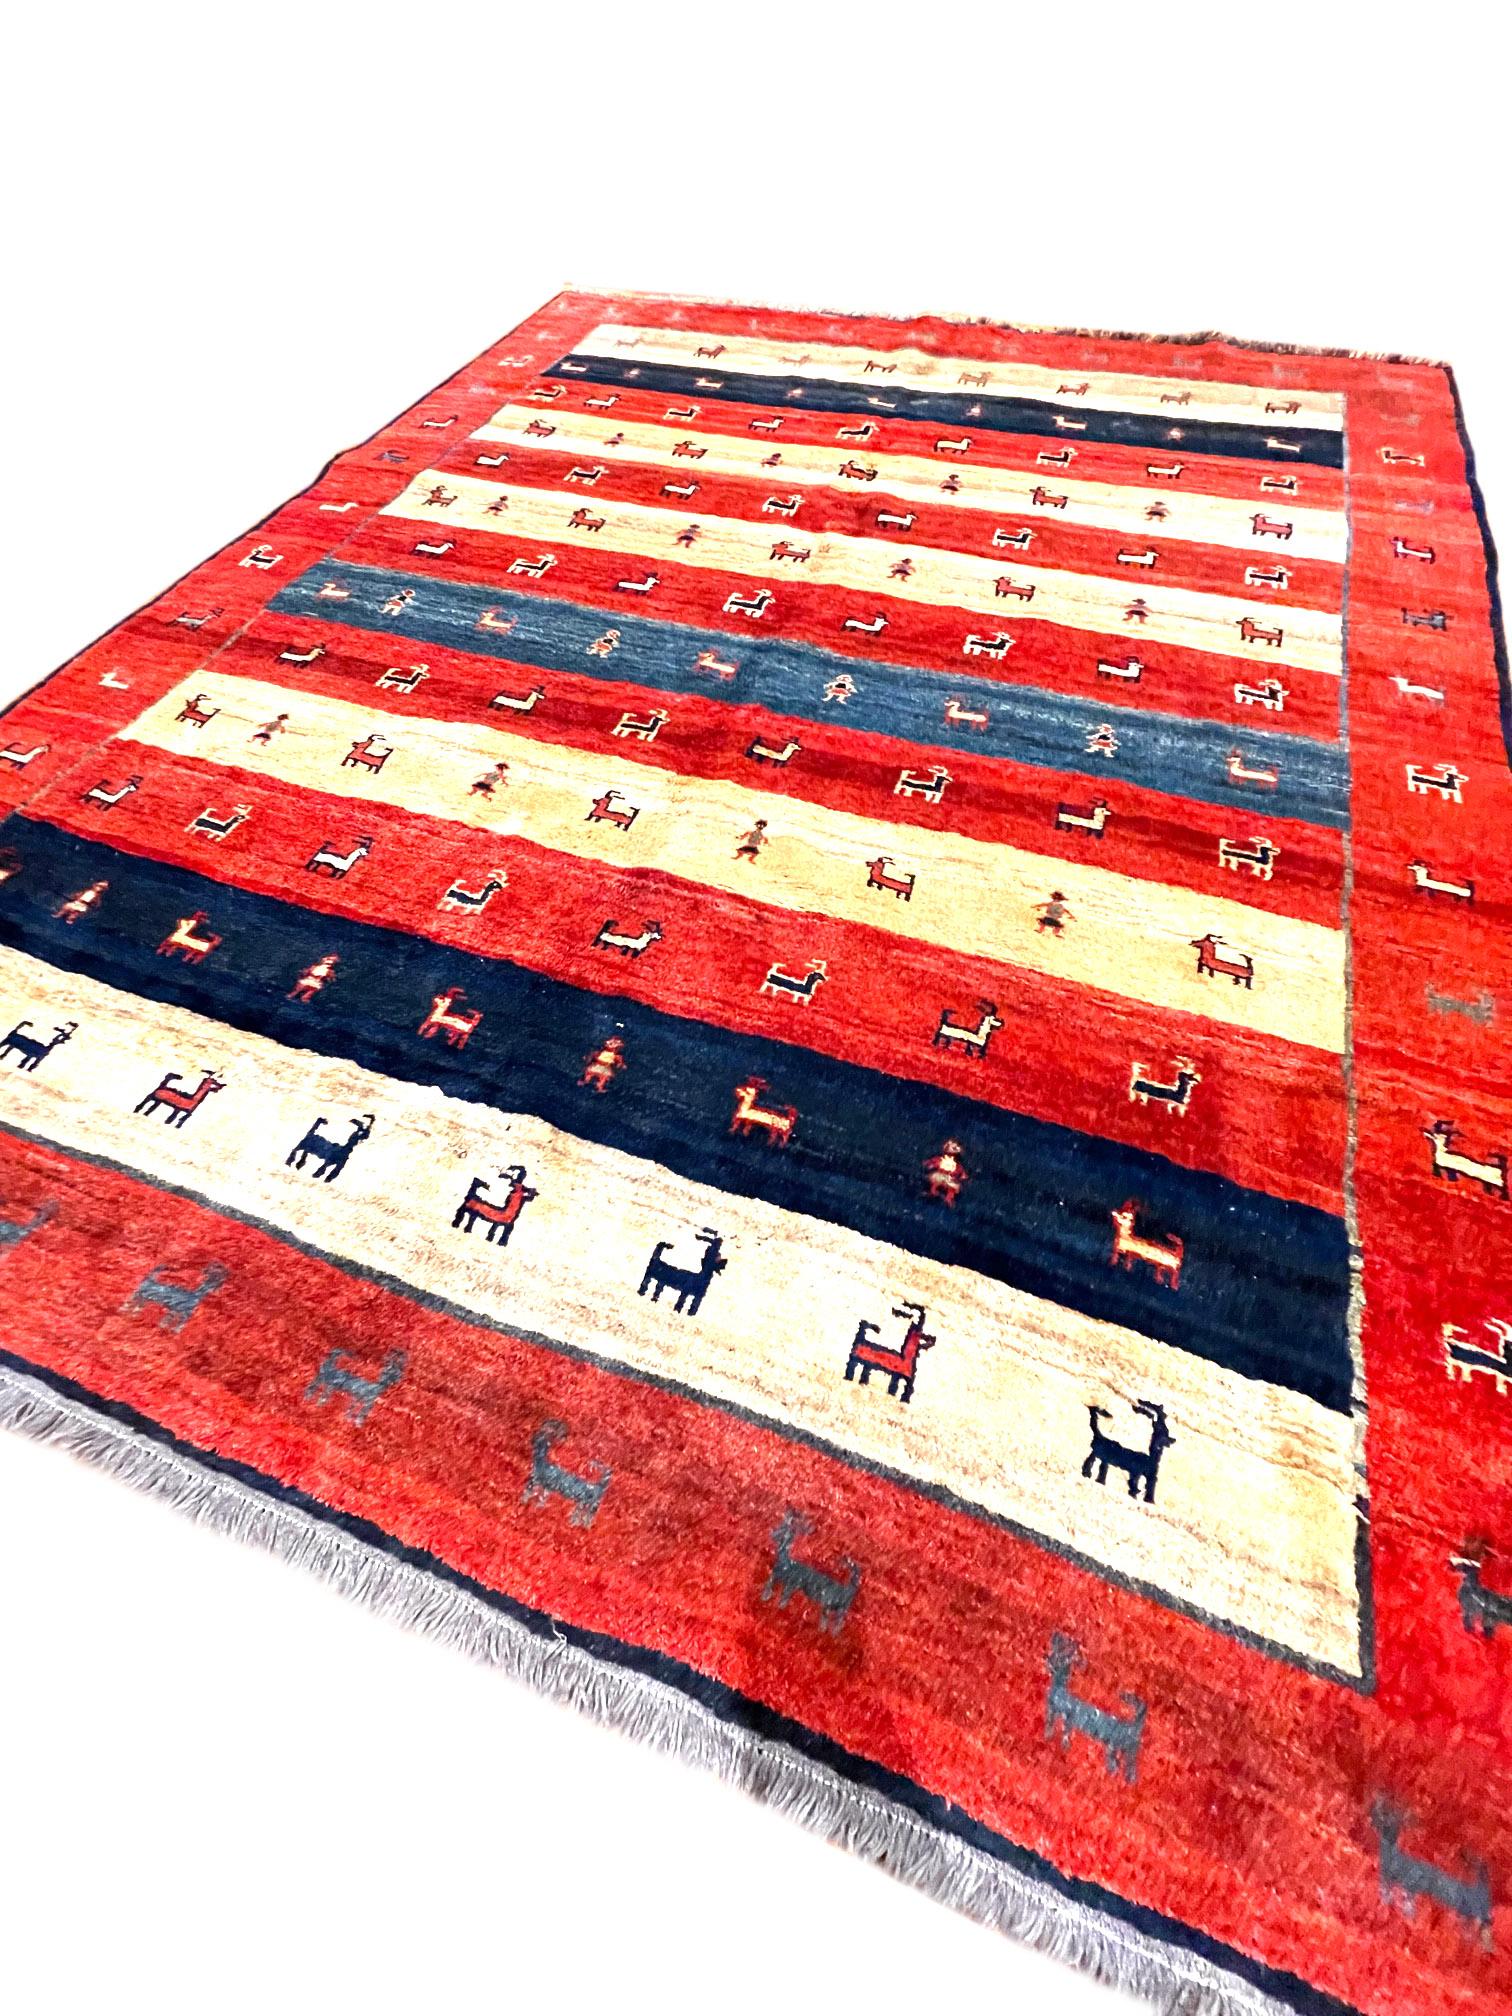 Authentic Persian Shiraz Hand Knotted Tribal Animal Motif Red Blue Gabbeh For Sale 5